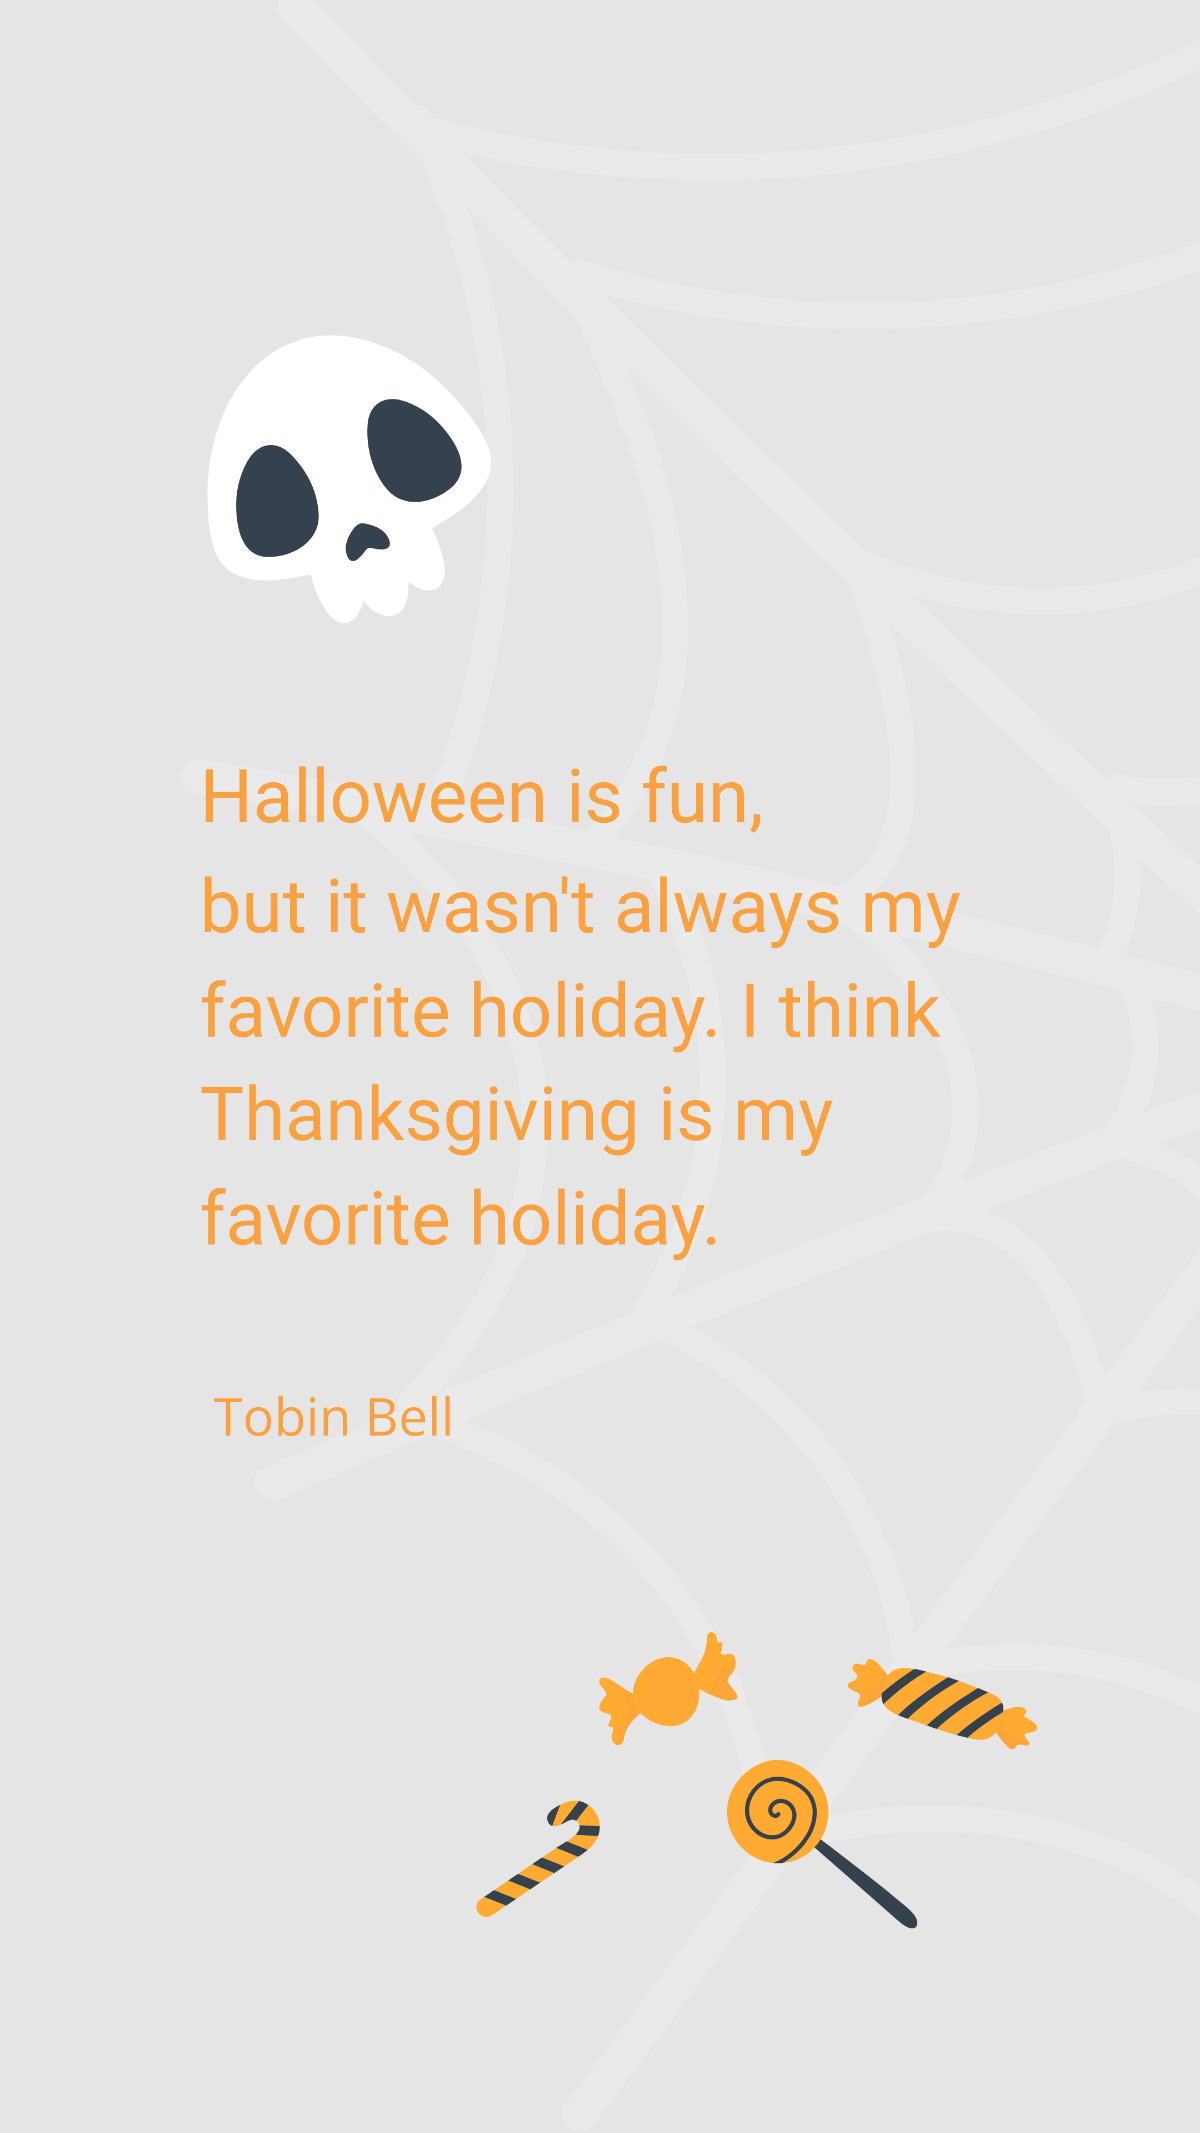 Tobin Bell- Halloween is fun, but it wasn't always my favorite holiday. I think Thanksgiving is my favorite holiday.  Template